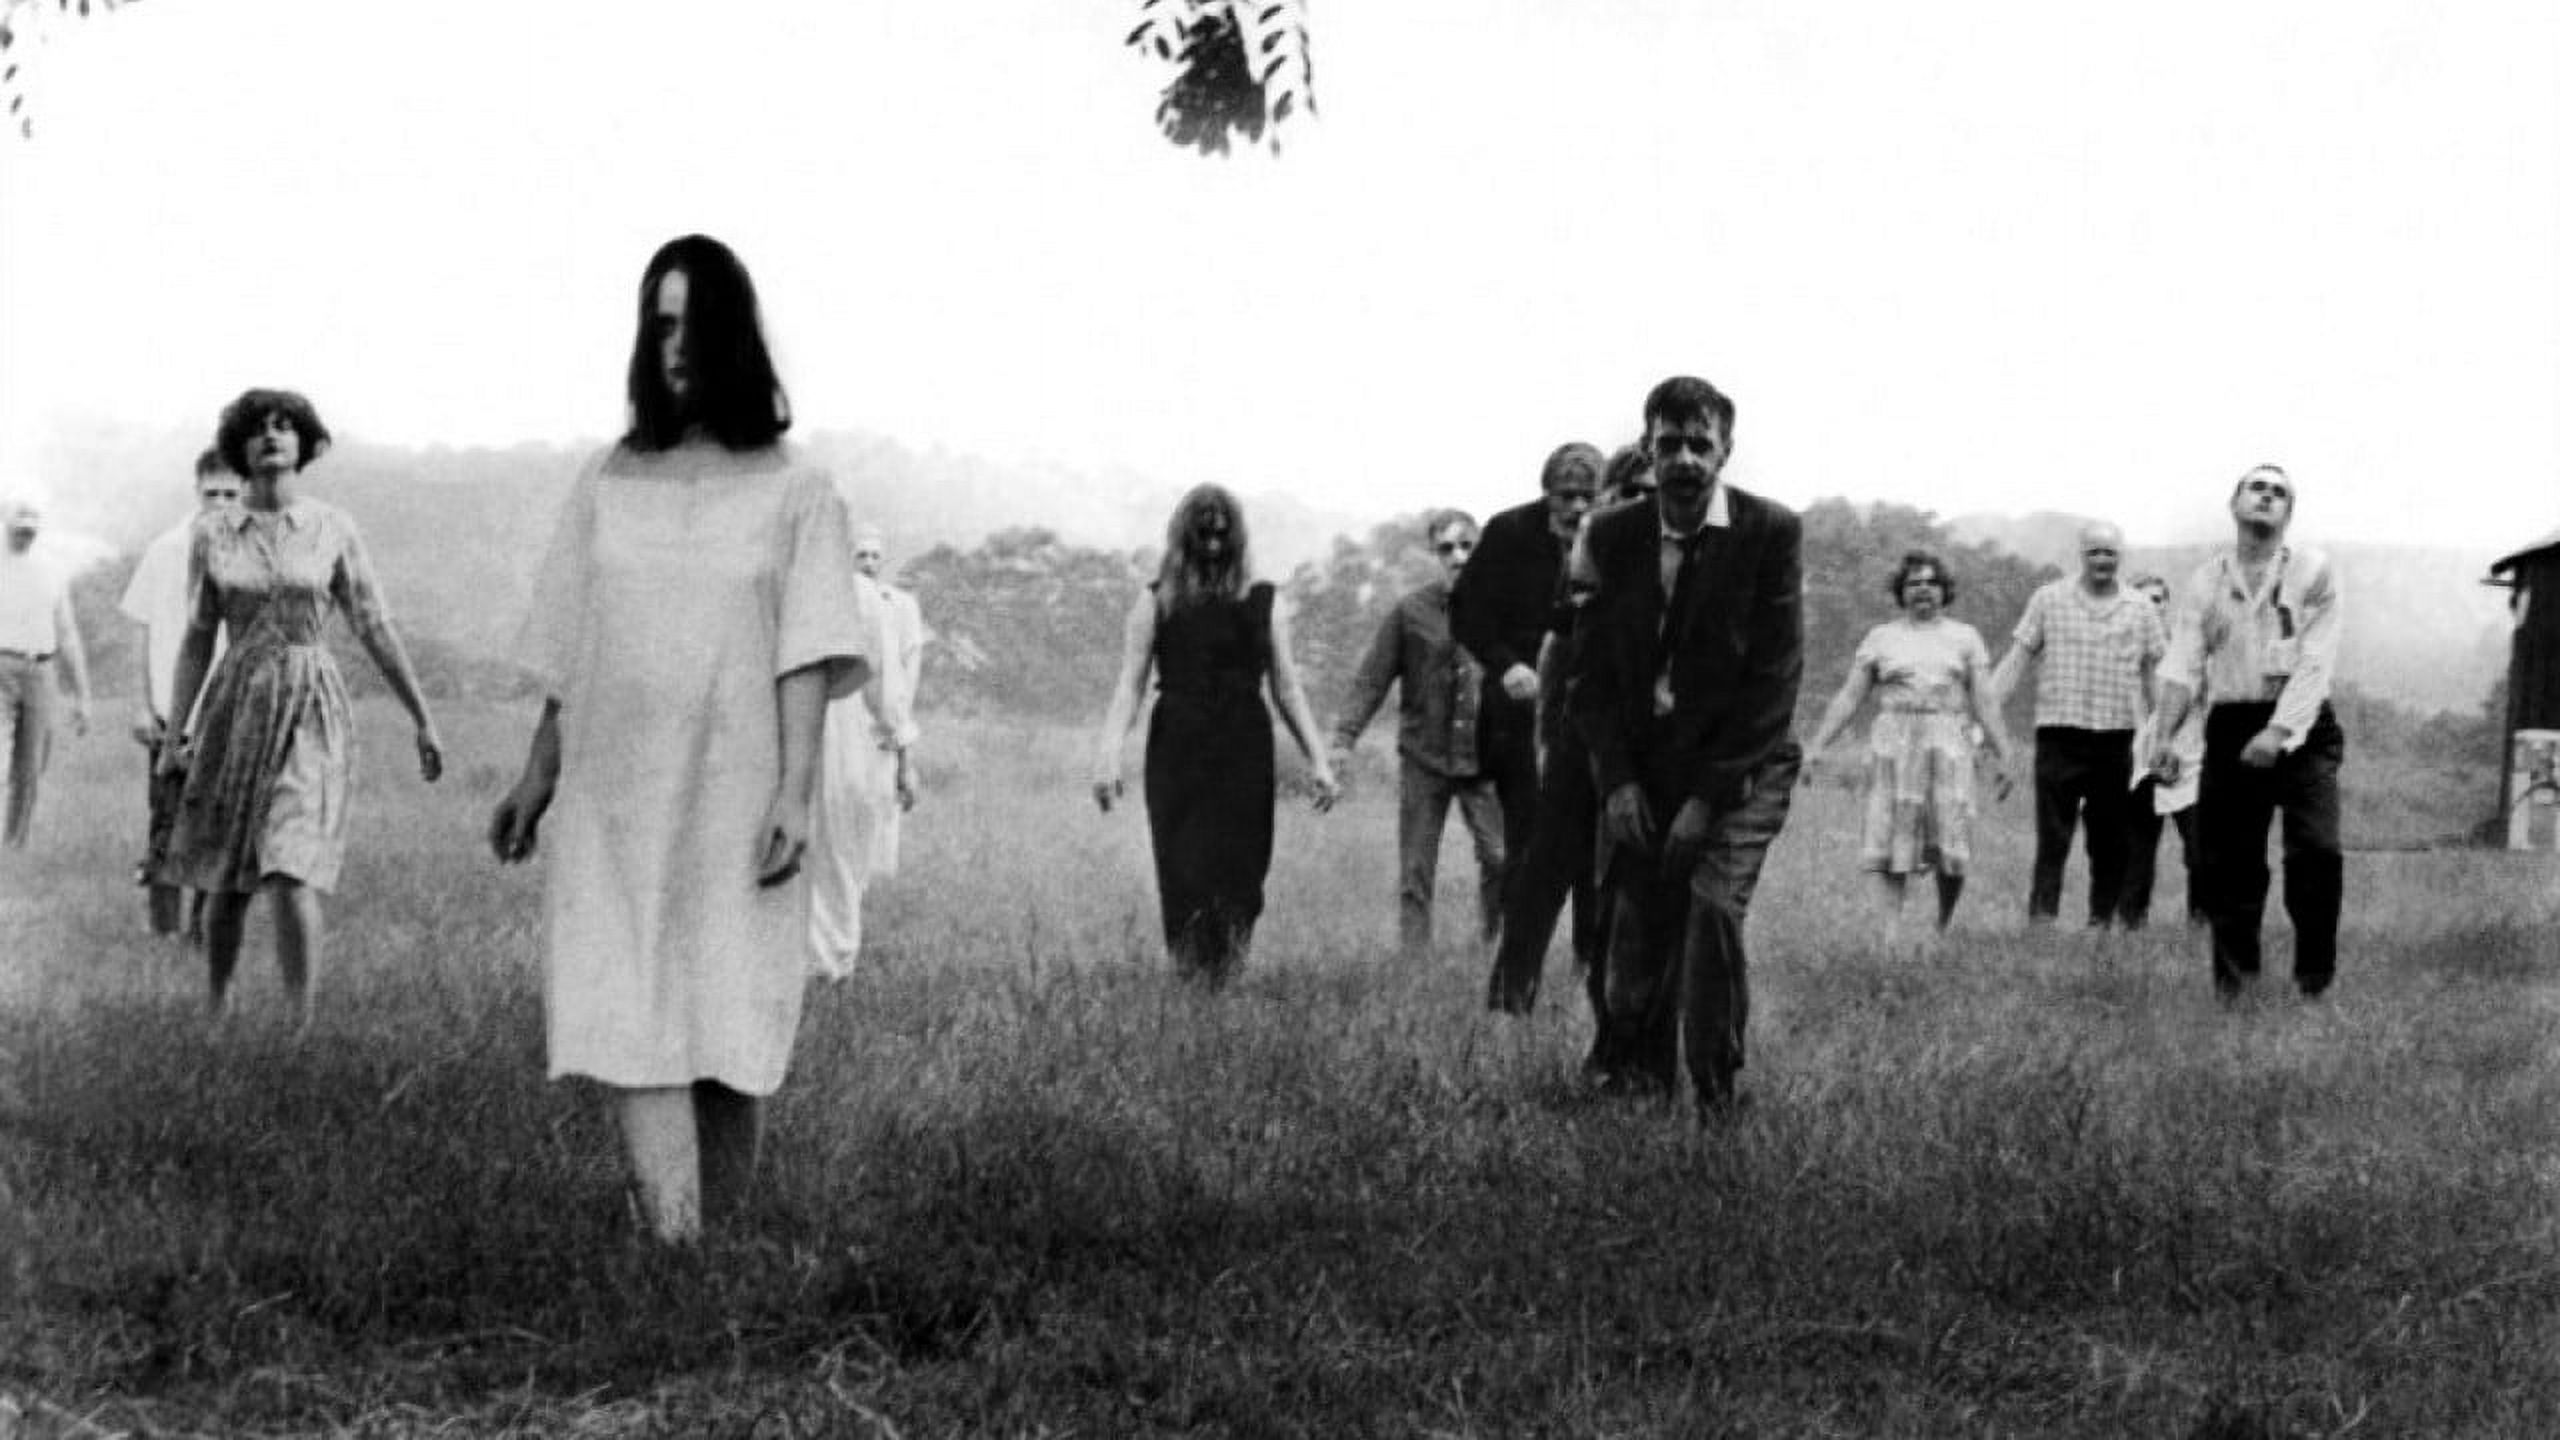 Night of the Living Dead (Criterion Collection) (Blu-ray) - image 5 of 5